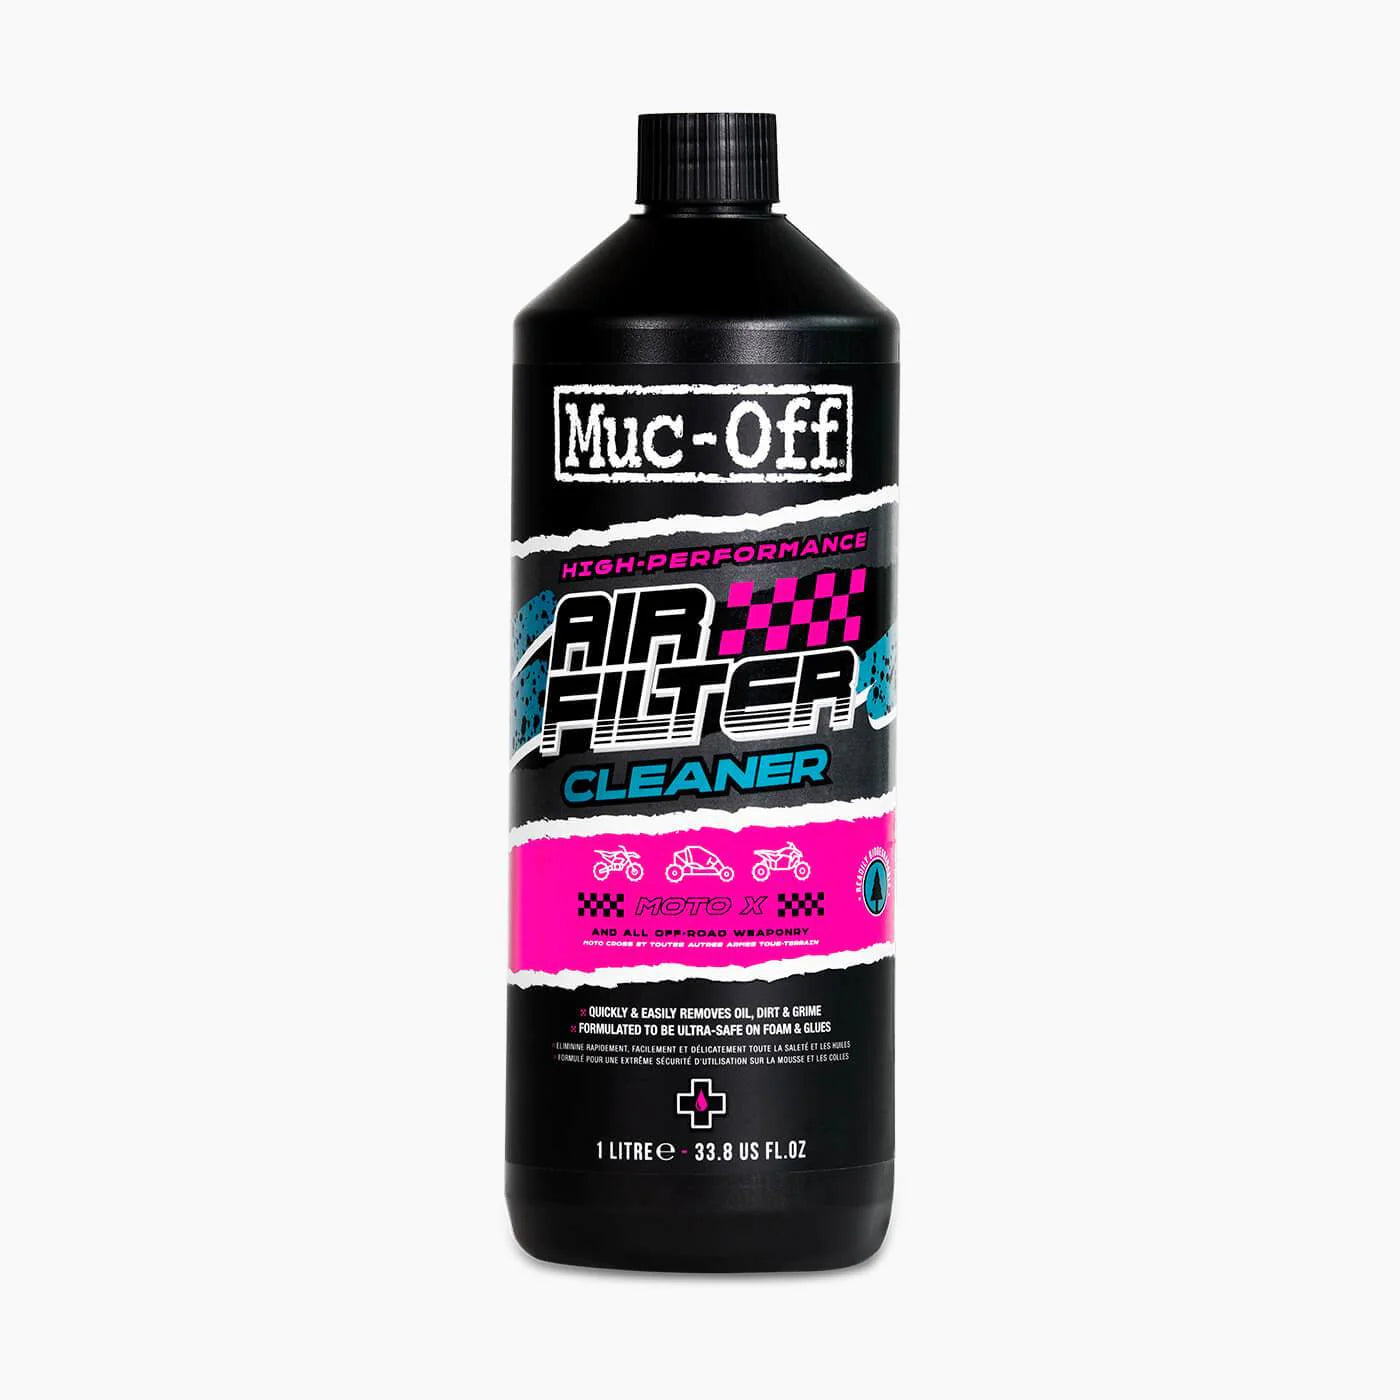 Muc-off Air Filter Cleaner 1L bottle for effectively cleaning motorcycle and car air filters